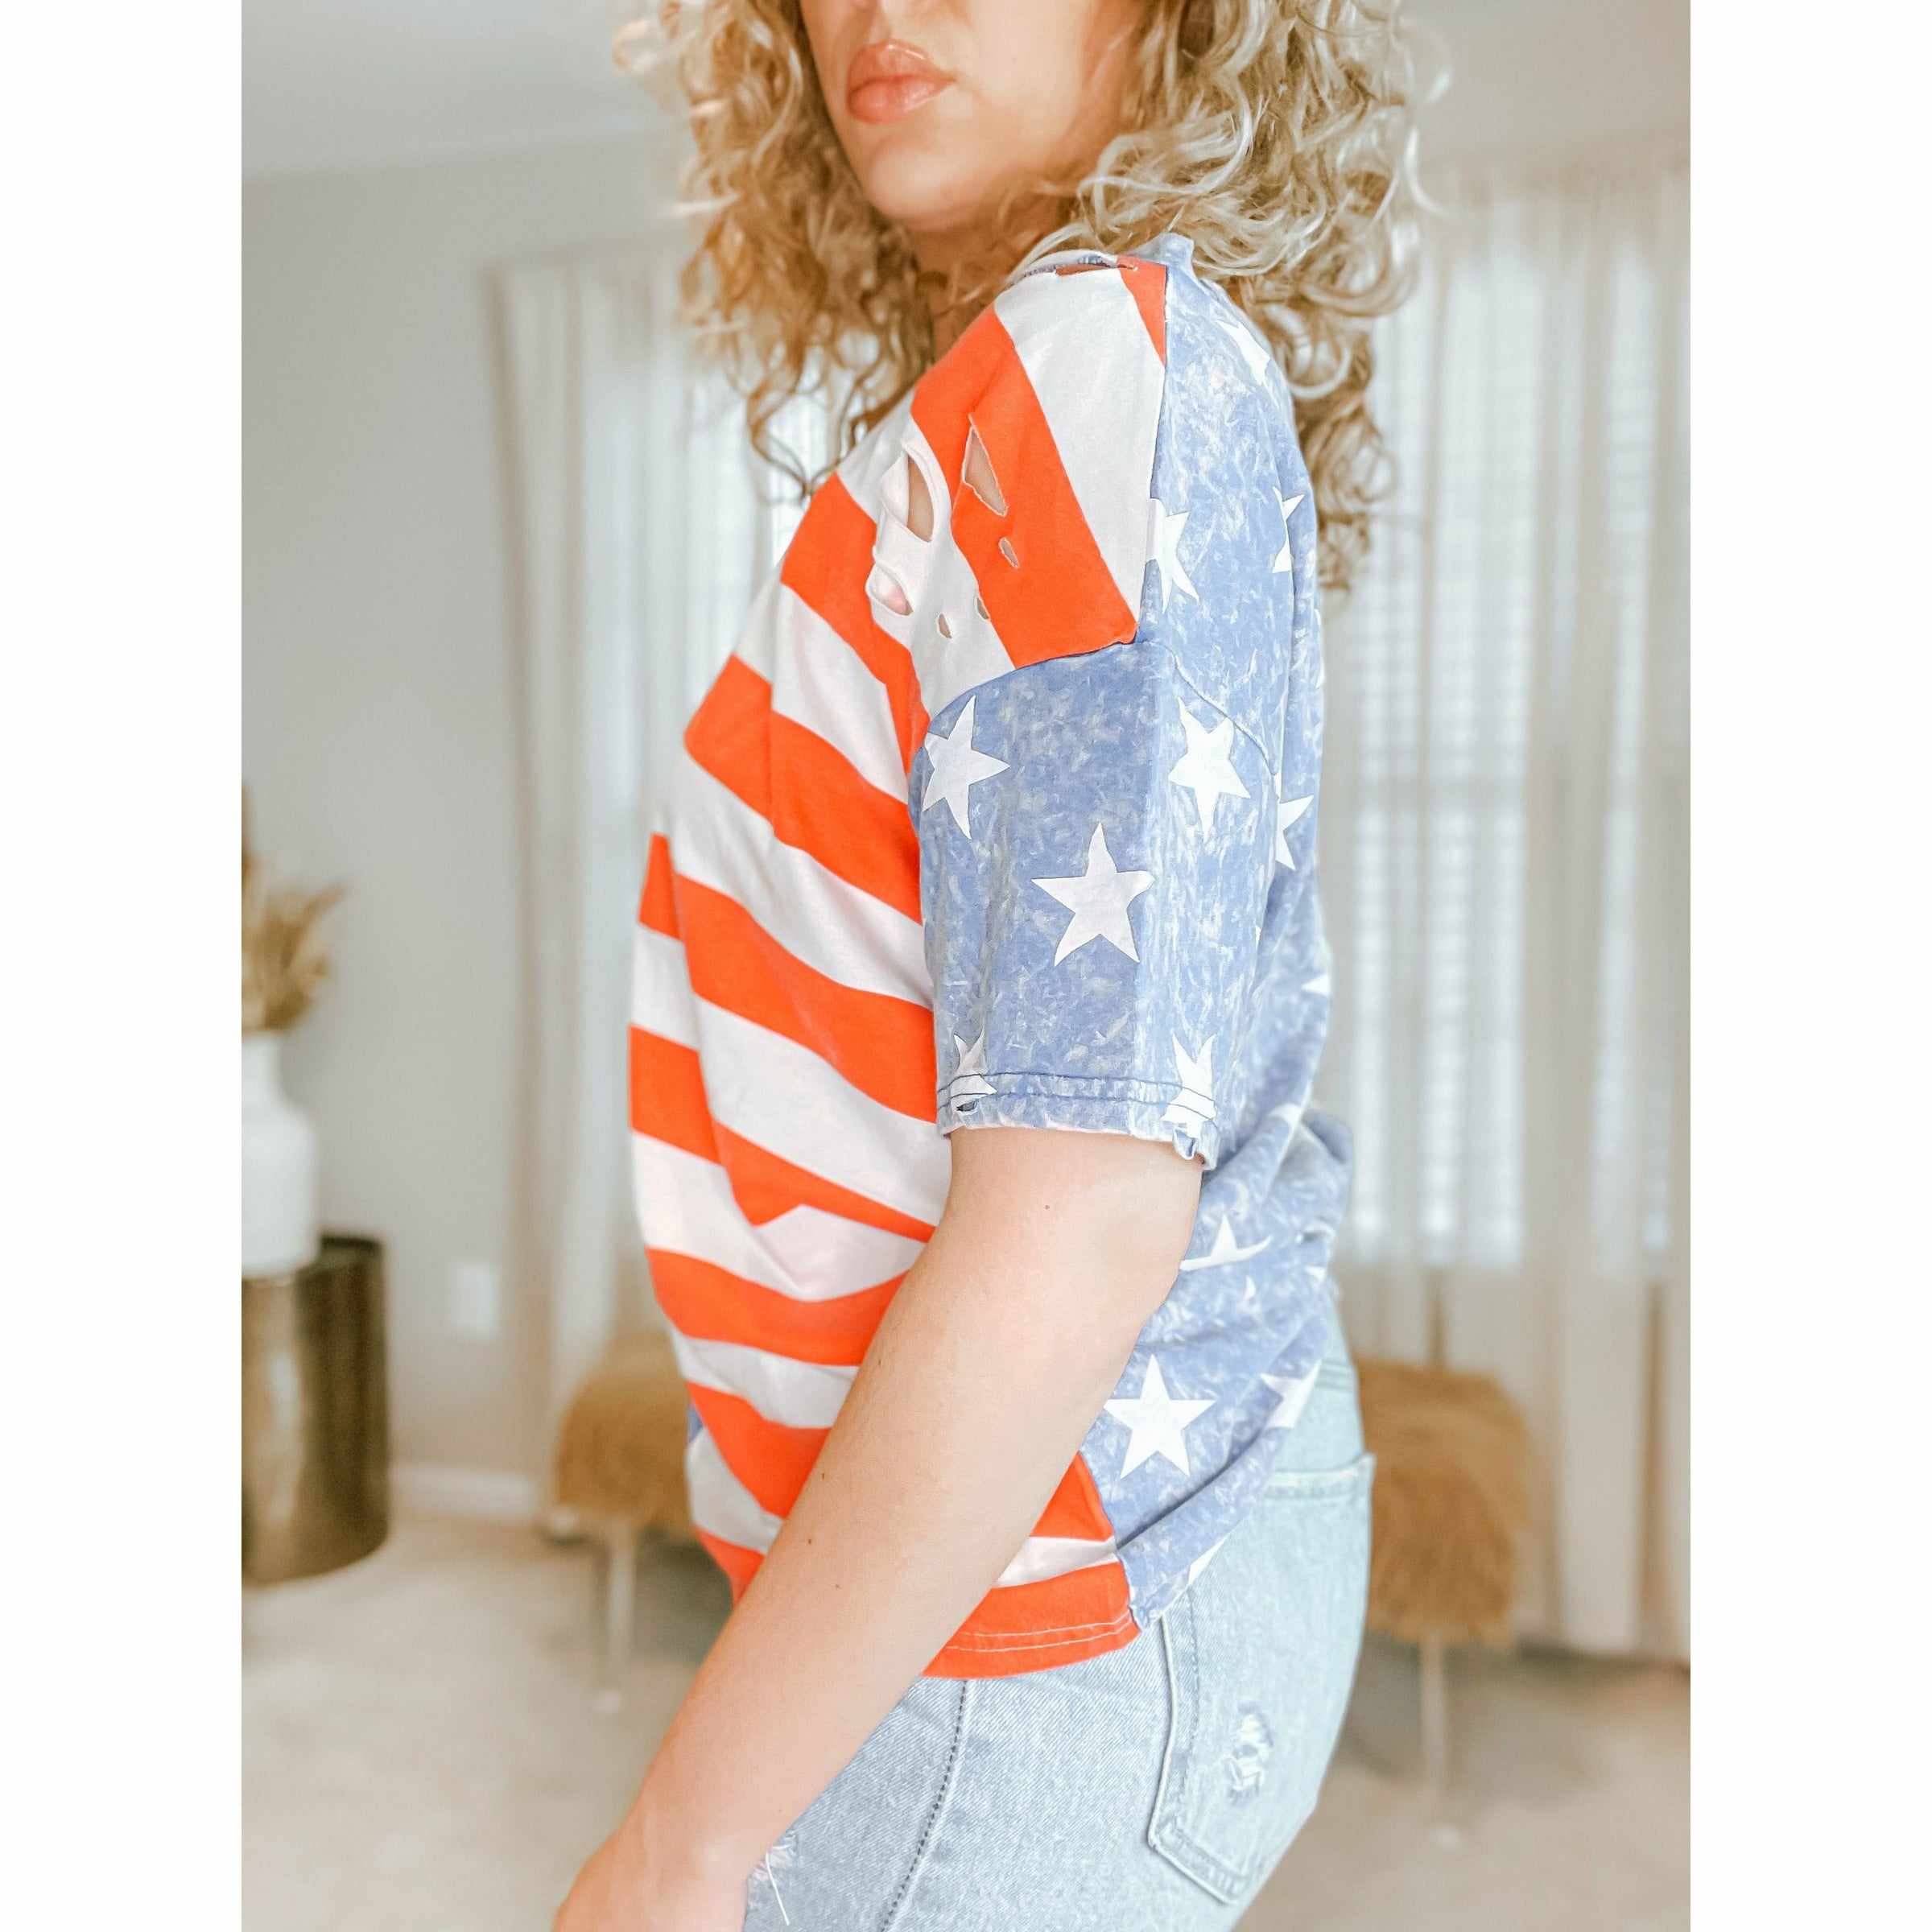 America the Beautiful Tee - The Hive by Chris Jesselle